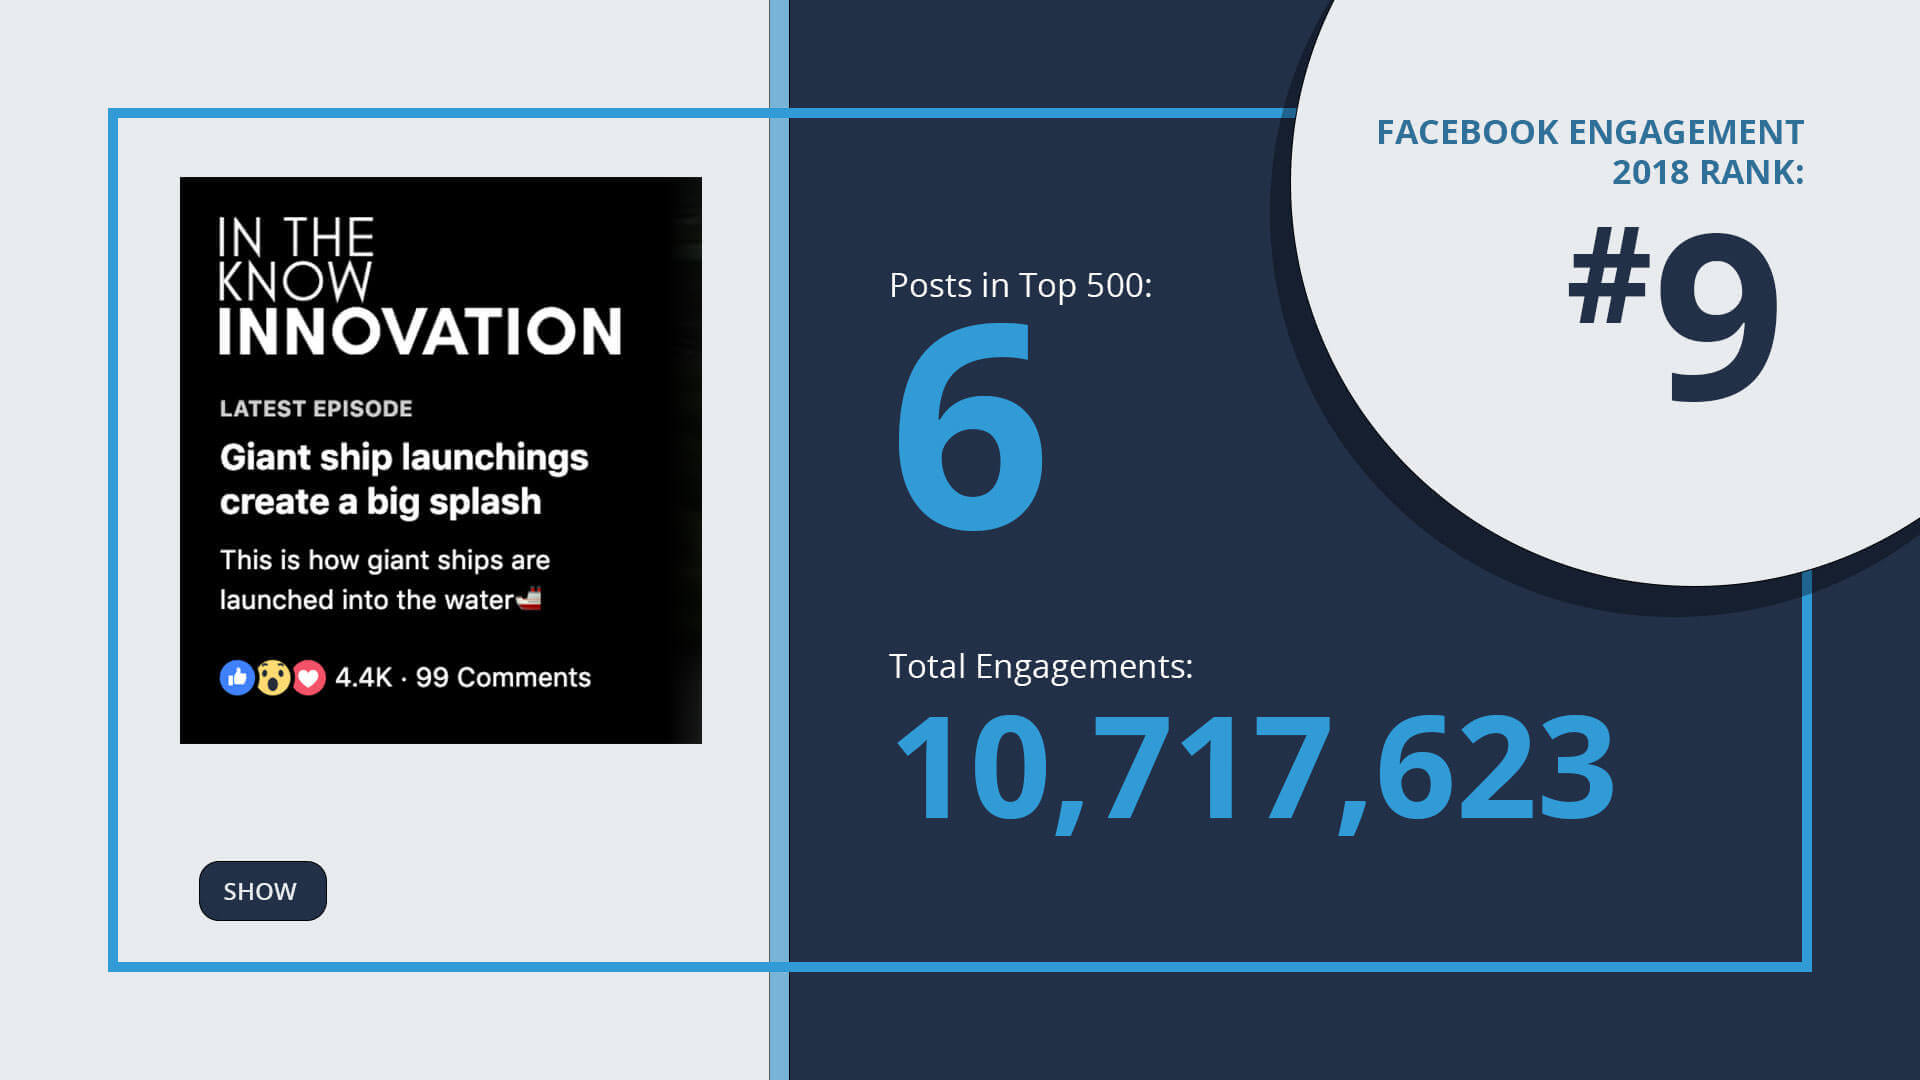 facebook-engagement-top-10-in-the-know-innovation